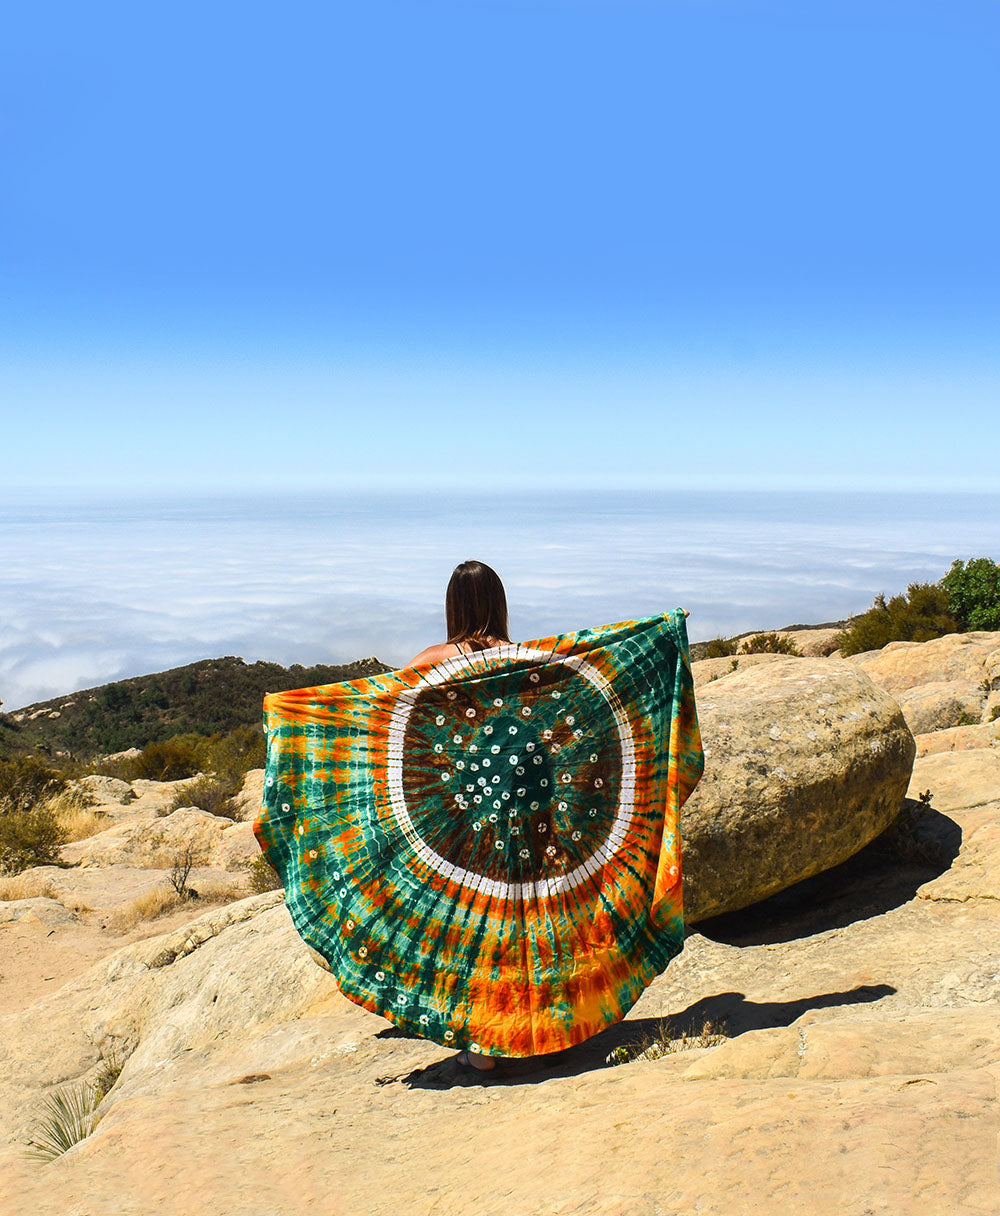 Channel your inner hippie and let your soul free with tie dye everything this summer. From clothes, to beach blankets, to tote bags, and home decor. Tie dye will be heating up the summer with it’s classic summer of love vibe.